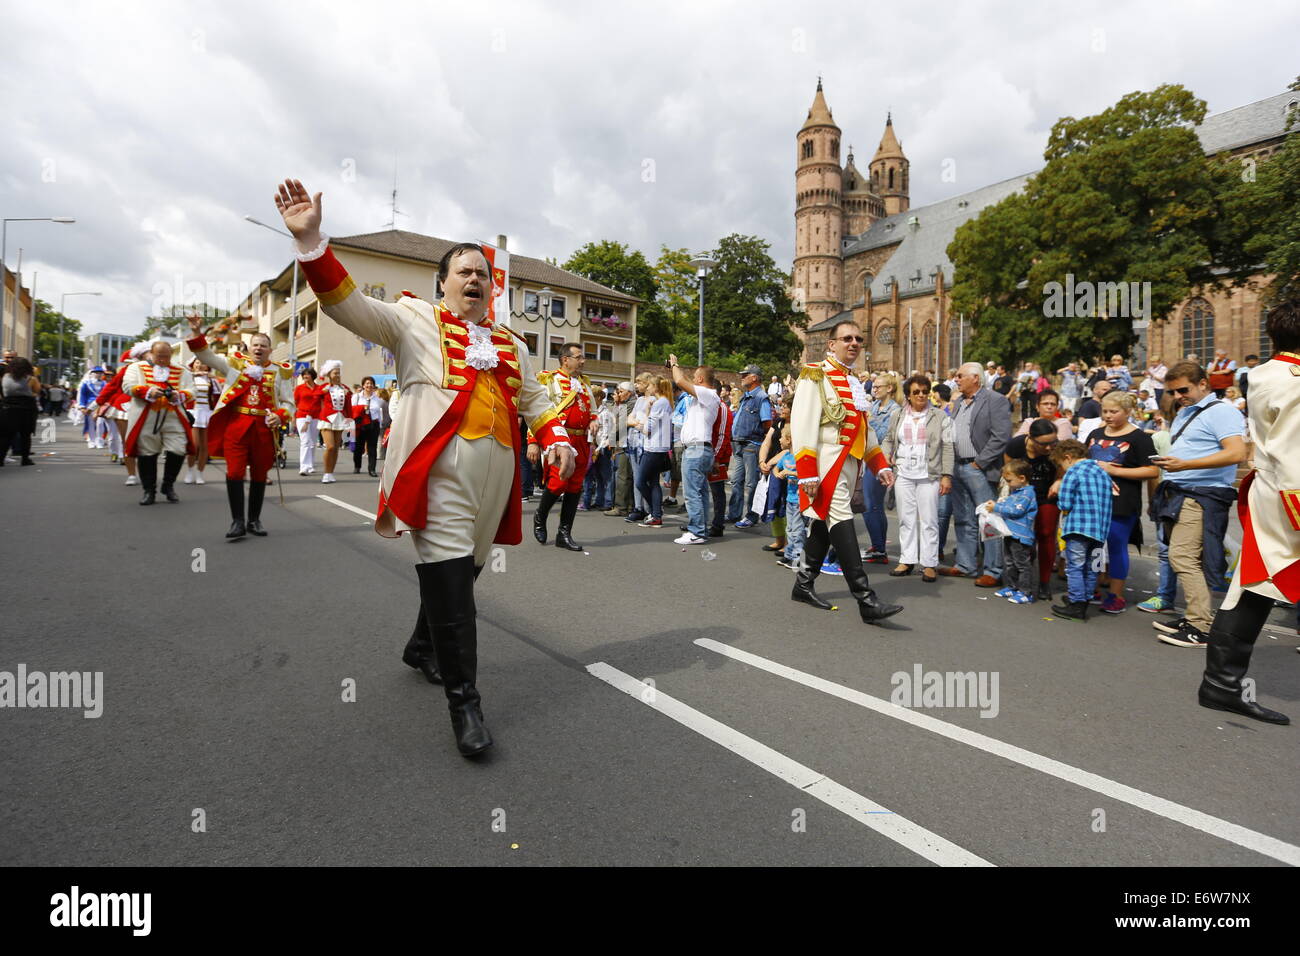 Worms, Germany. 31st Aug, 2014. Members of the Wormser Prinzengarde (Worms Guard of the Prince) march in the Backfischfest parade 2014.The cathedral of Worms can be seen in the background. The first highlight of this year's Backfischfest was the big parade through the city of Worms with 125 groups and floats. Community groups, sport clubs, music groups and business from Worms and further afield took part. © Michael Debets/Pacific Press/Alamy Live News Stock Photo